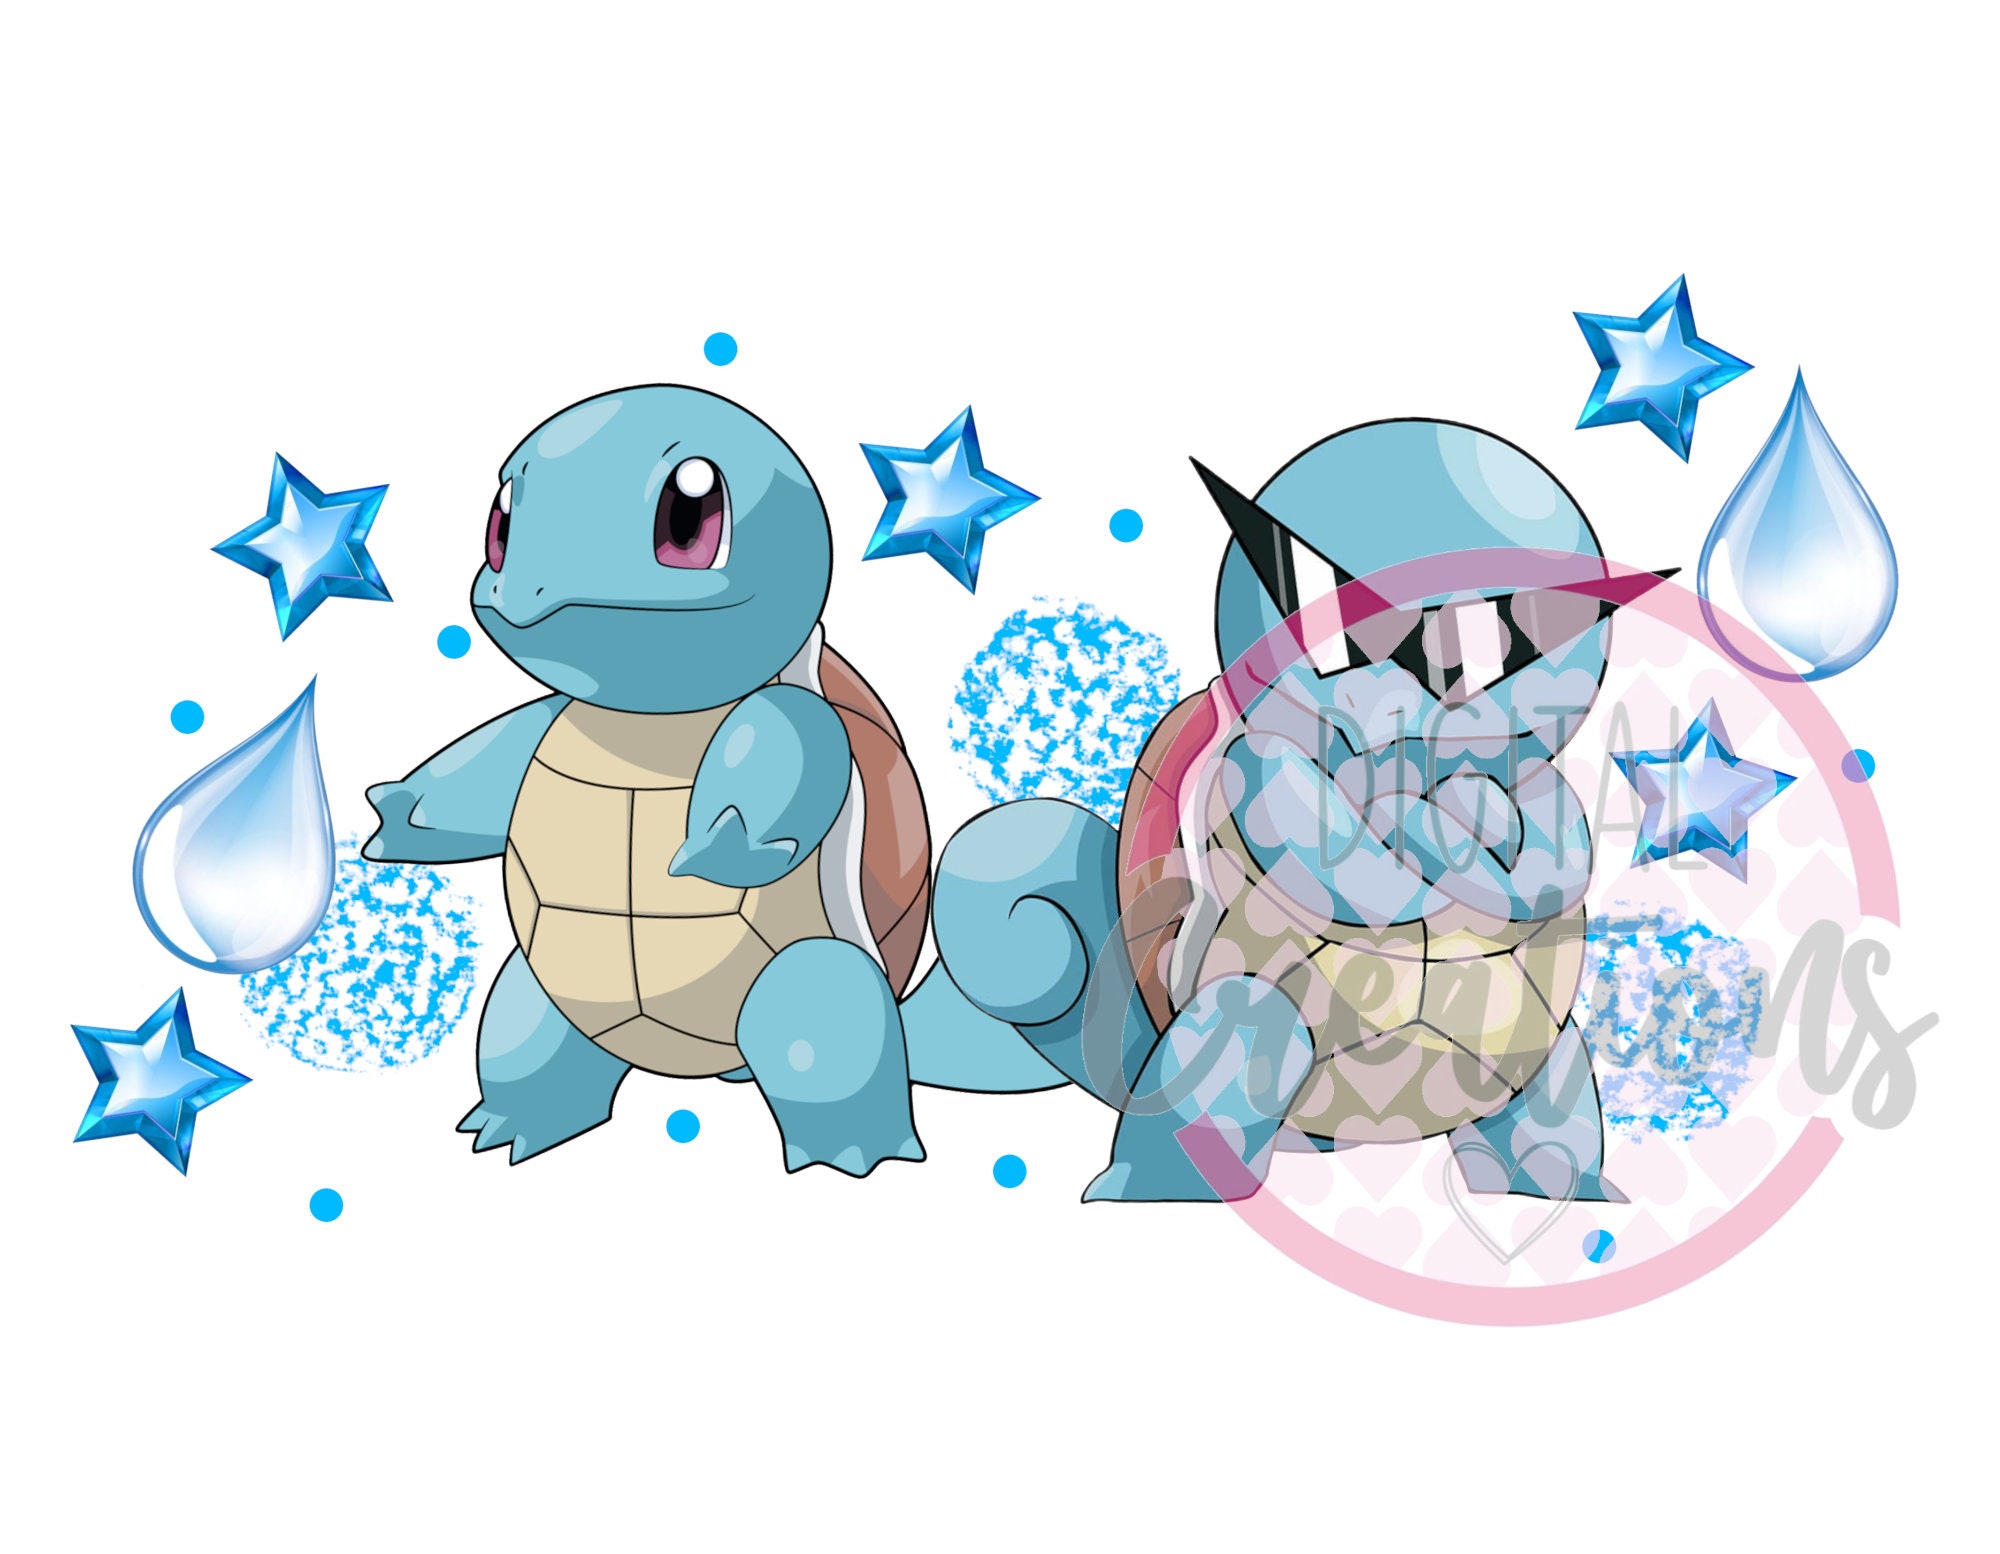 Pokemon Svg, Pokemon Png, Squirtle with Pokeball Svg, Squirt - Inspire  Uplift